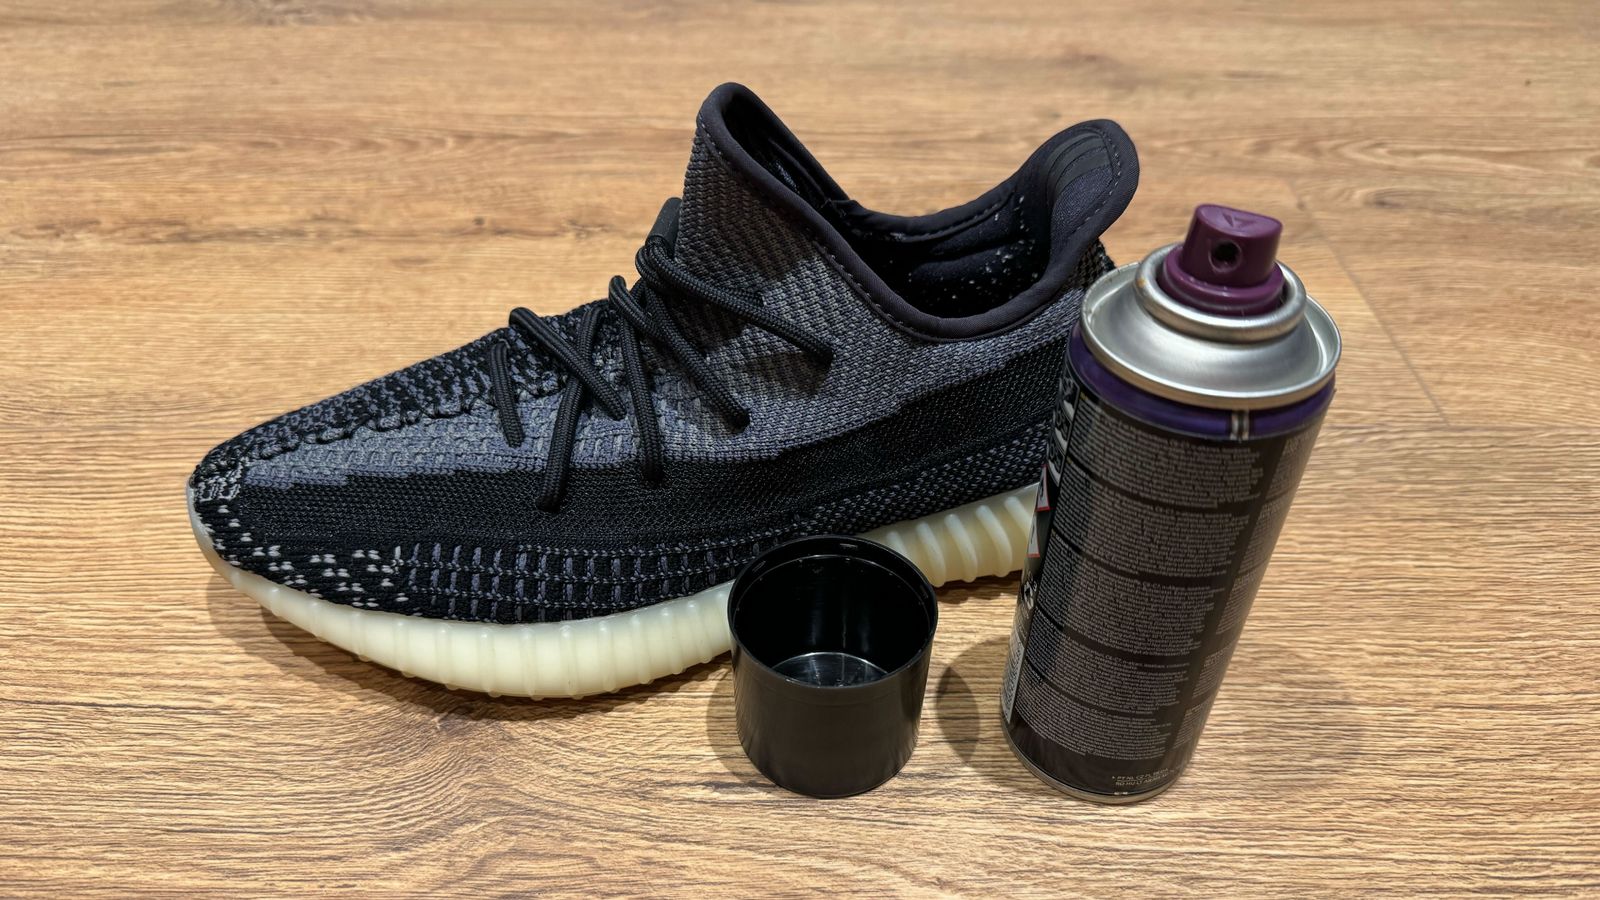 A black Crep Protect spray can with a purple spray nozzle next to a black knitted Yeezy with a gum sole.